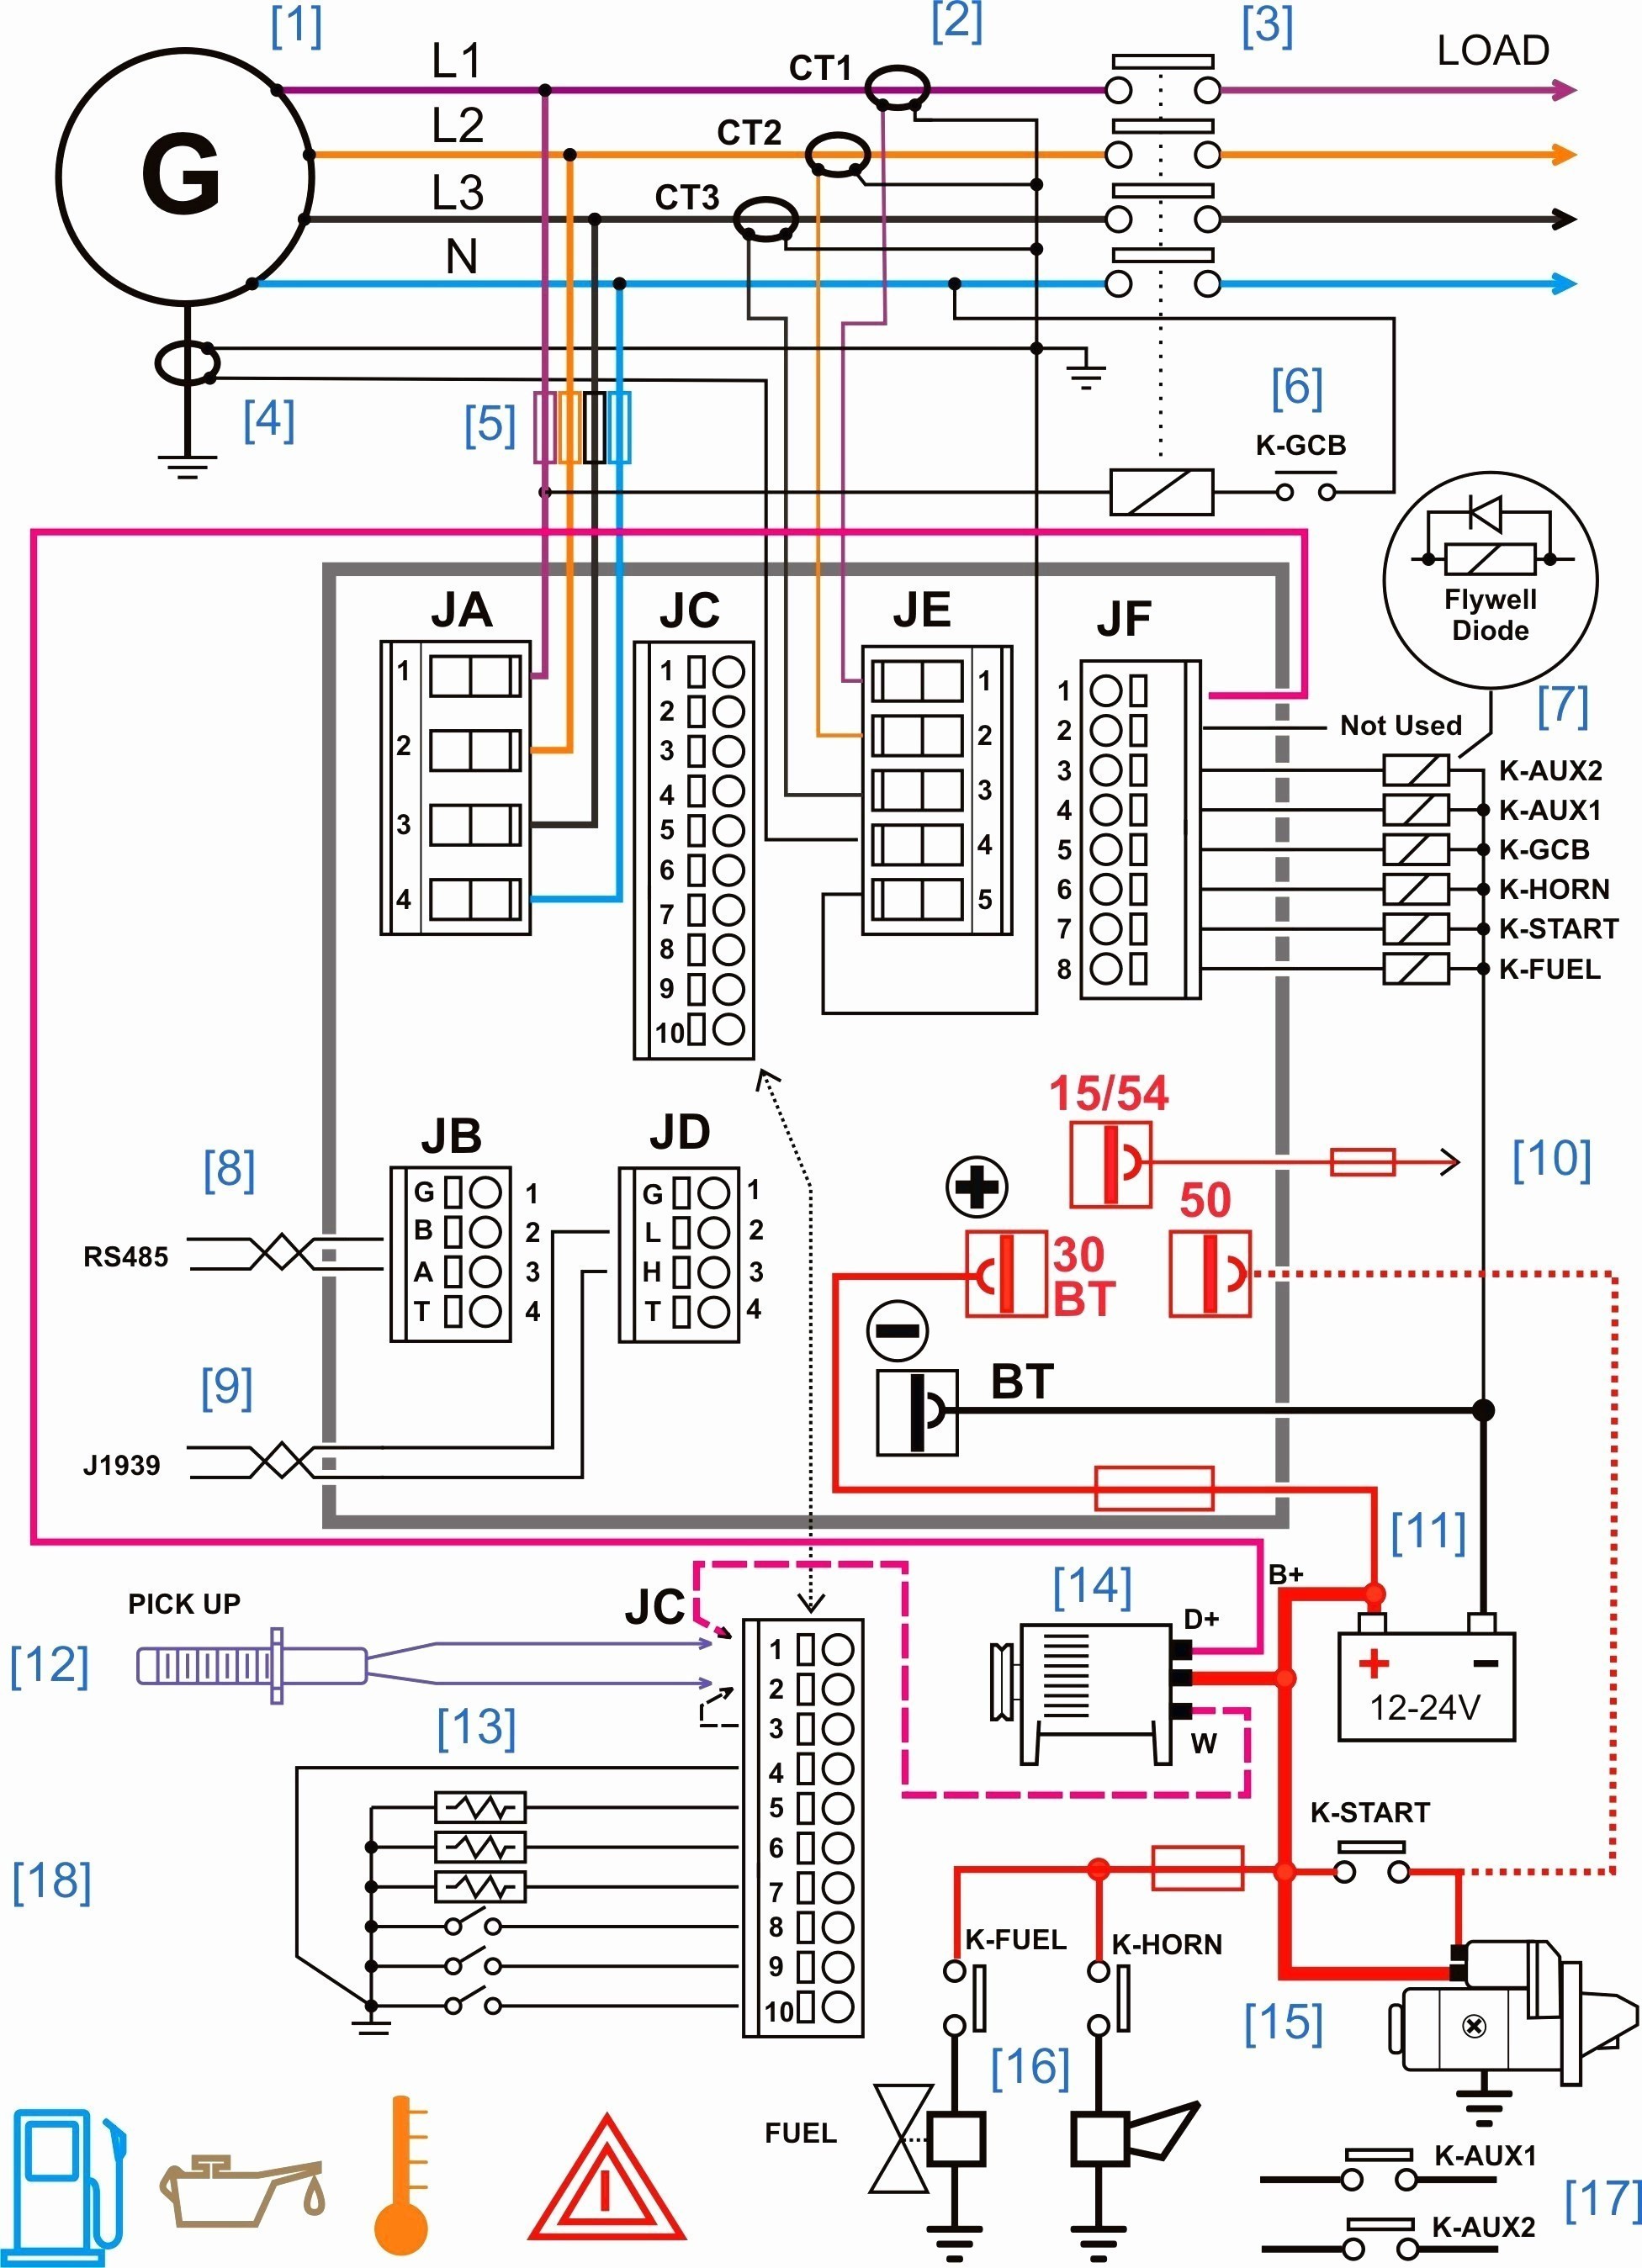 Automotive Electrical Wiring Diagrams Refrence Automotive Stereo Wiring Diagram Of Automotive Electrical Wiring Diagrams